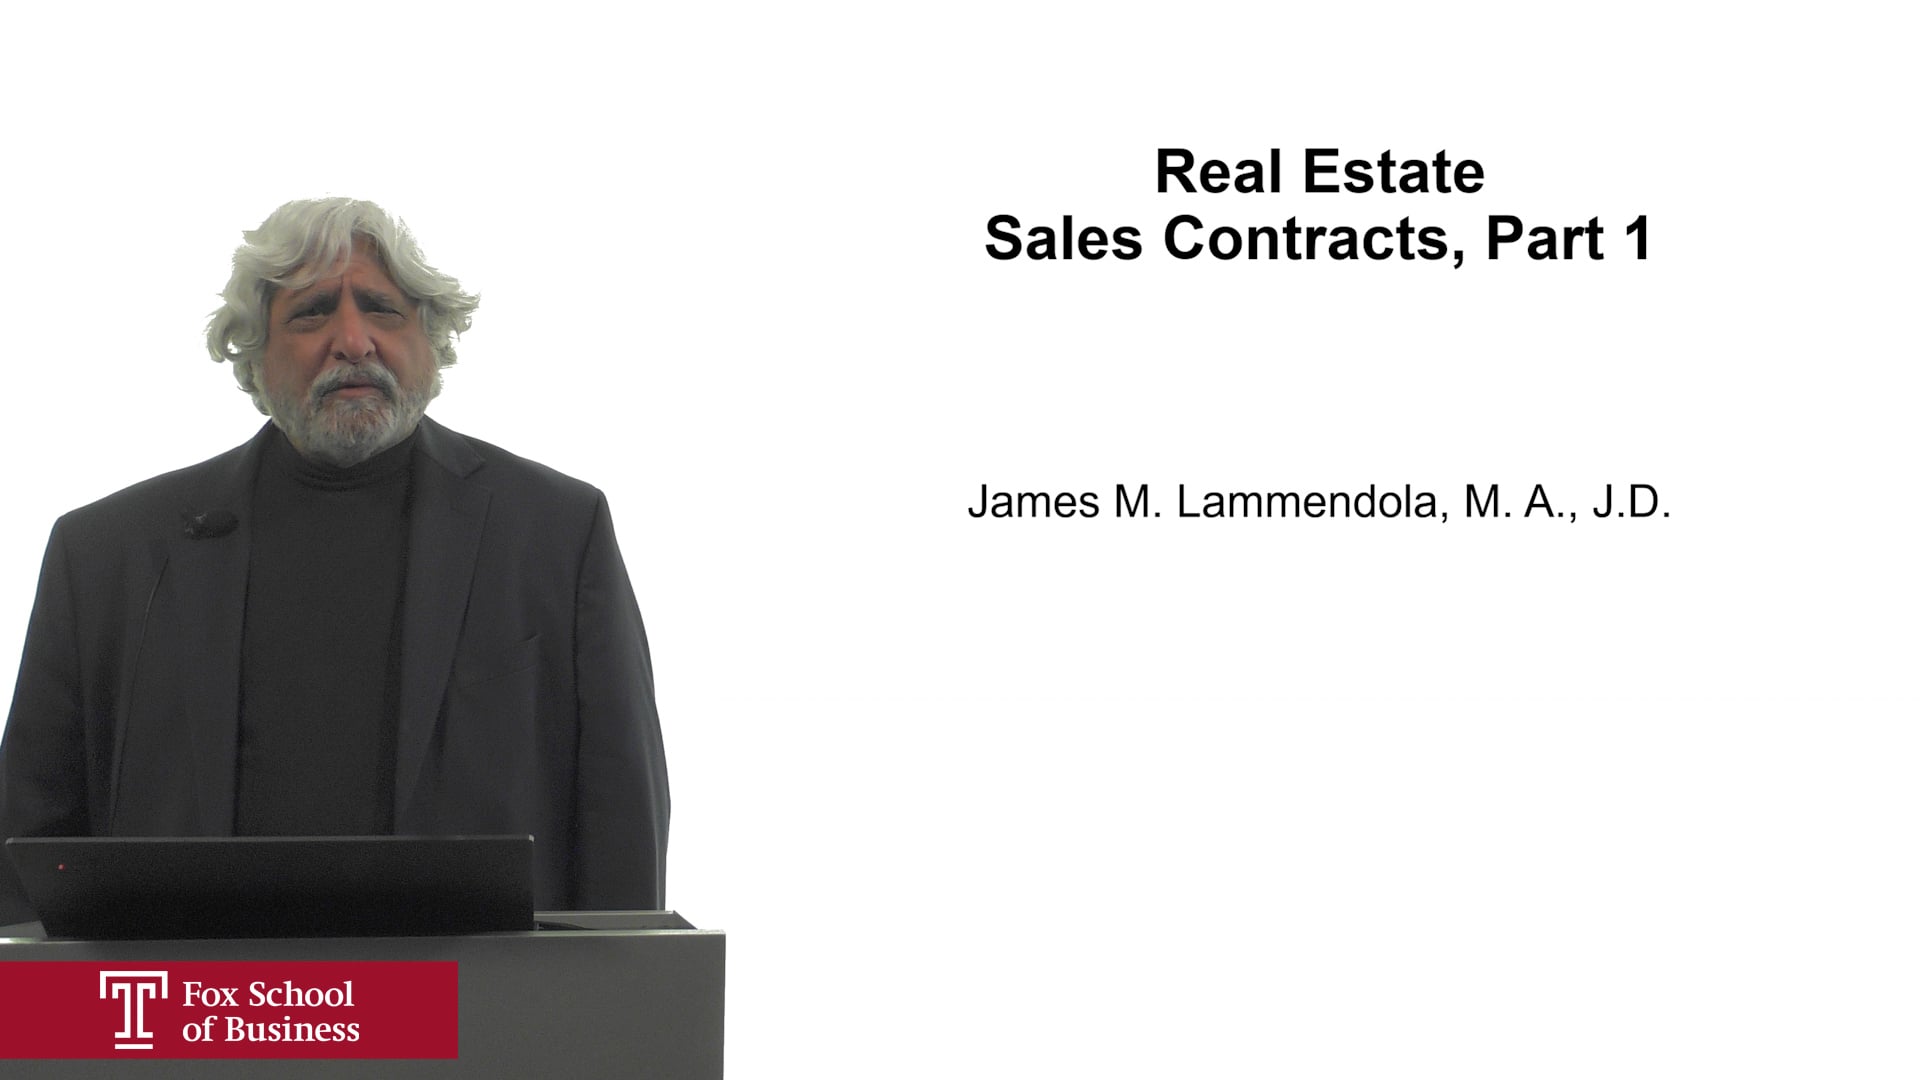 Real Estate Sale Contracts, Part 1